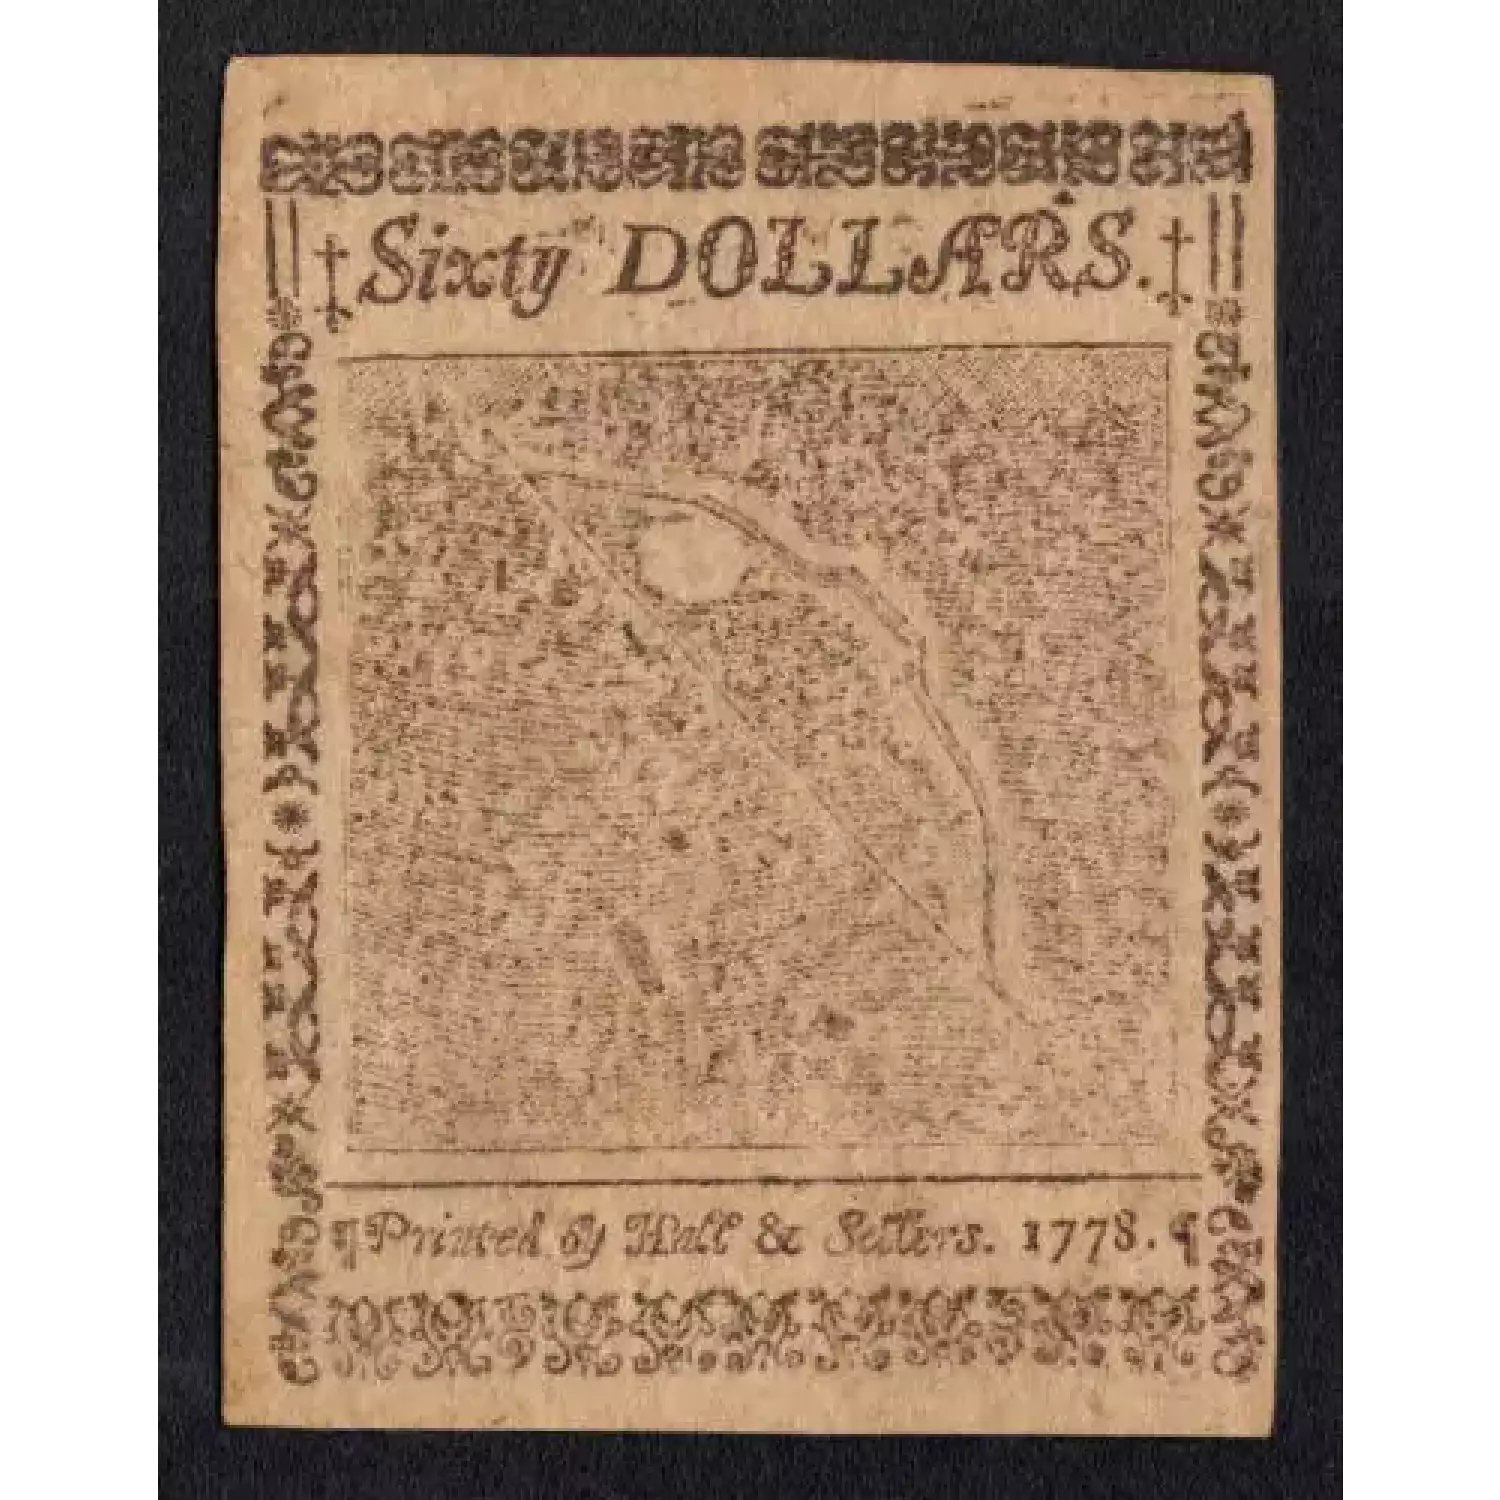 $60 September 26, 1778  CONTINENTAL CURRENCY CC-86 (4)